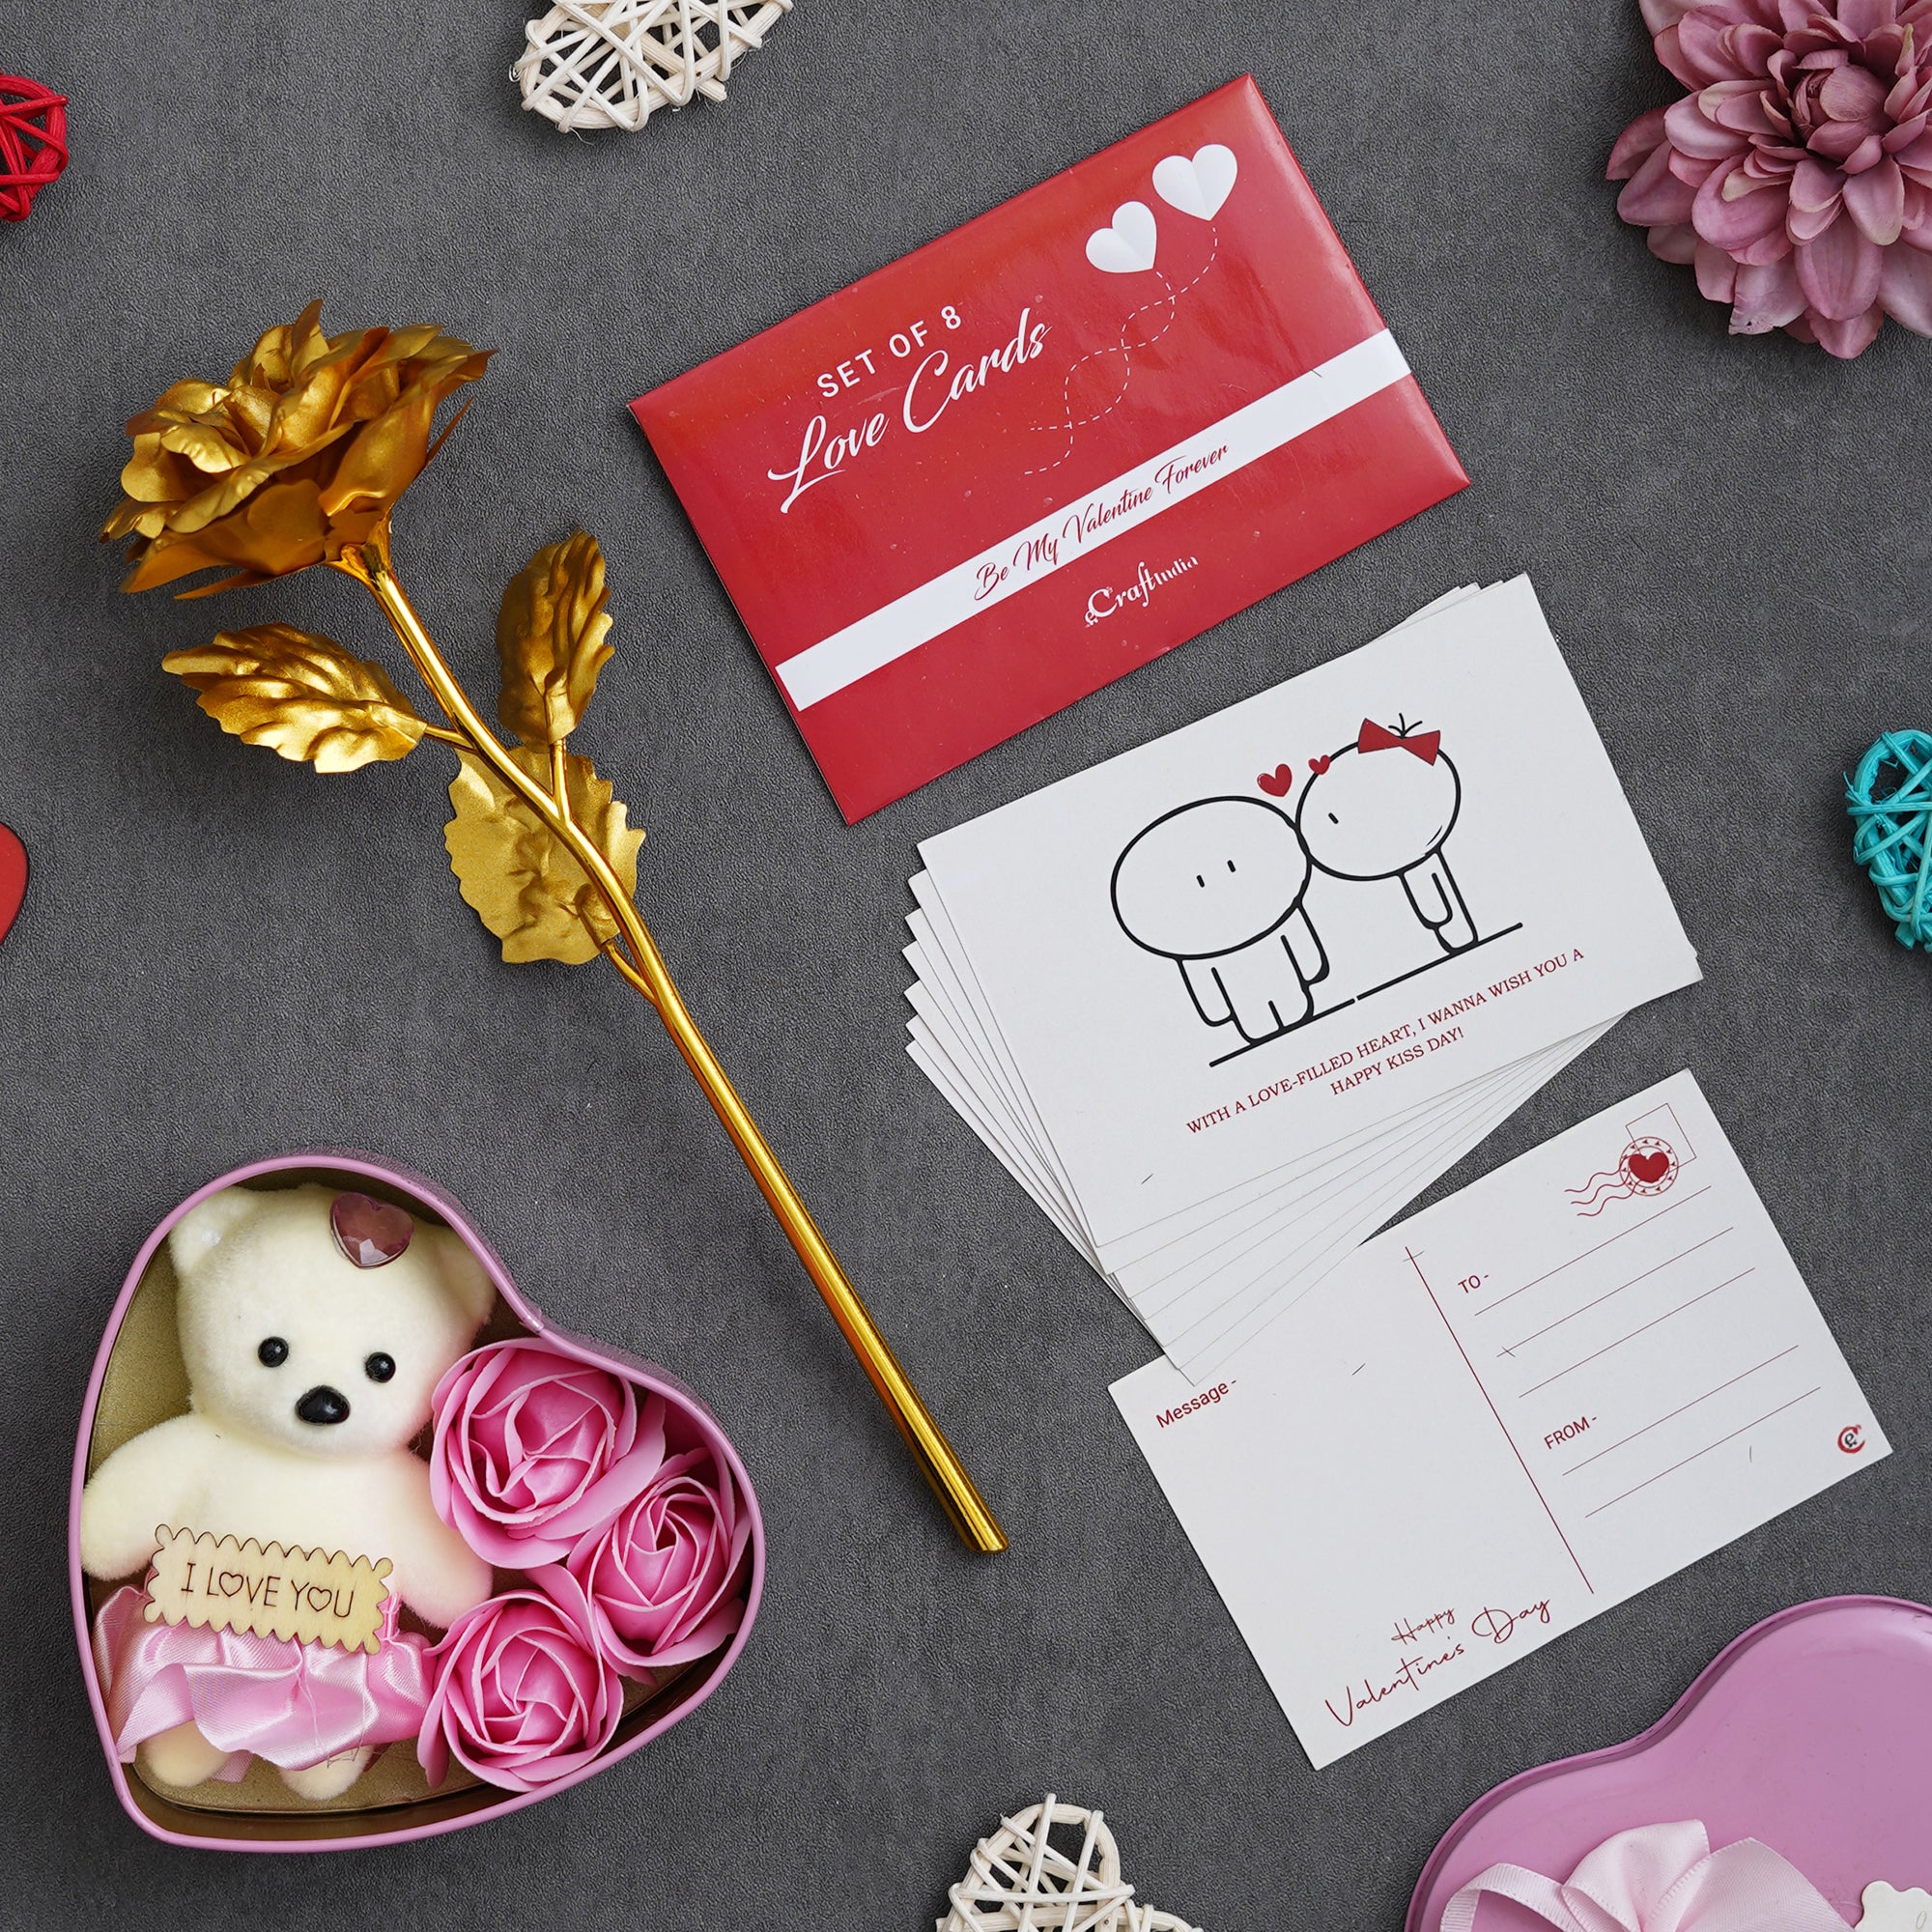 Valentine Combo of Set of 8 Love Post Cards Gift Cards Set, Golden Rose Gift Set, Pink Heart Shaped Gift Box with Teddy and Roses